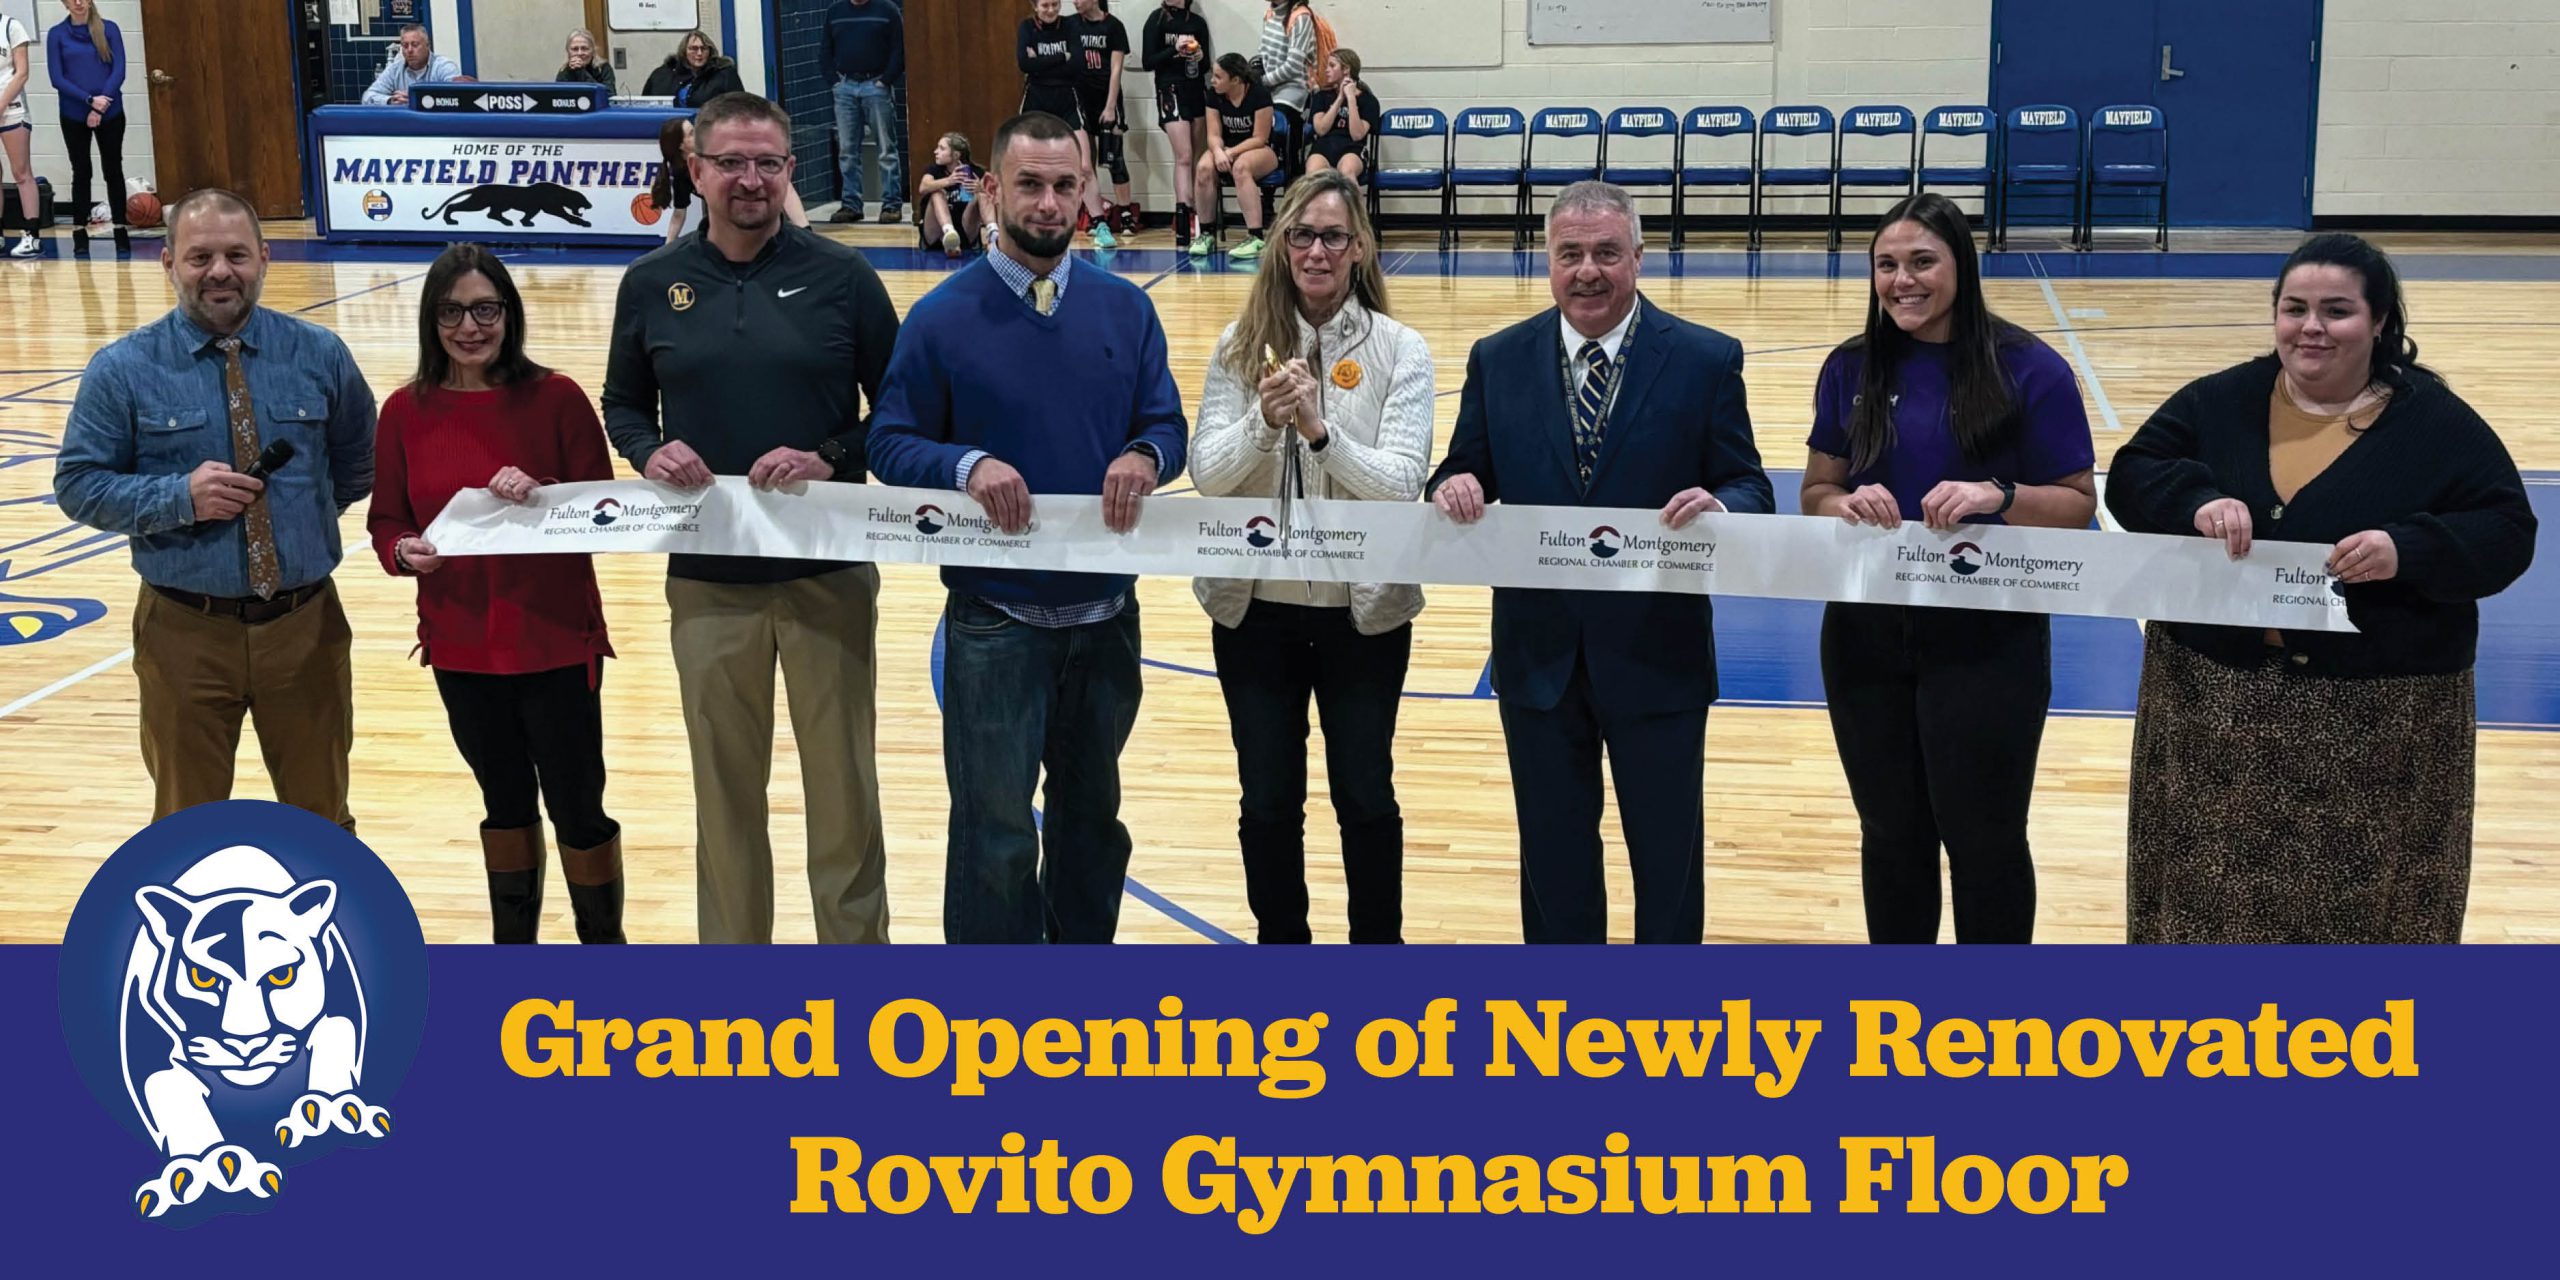 Eight people stand in a line in front of a ribbon and smile; woman in the middle holds big scissors over the ribbon. Panther logo is below and words: Grand Opening of the newly renovated Rovito Gymnasium floor.